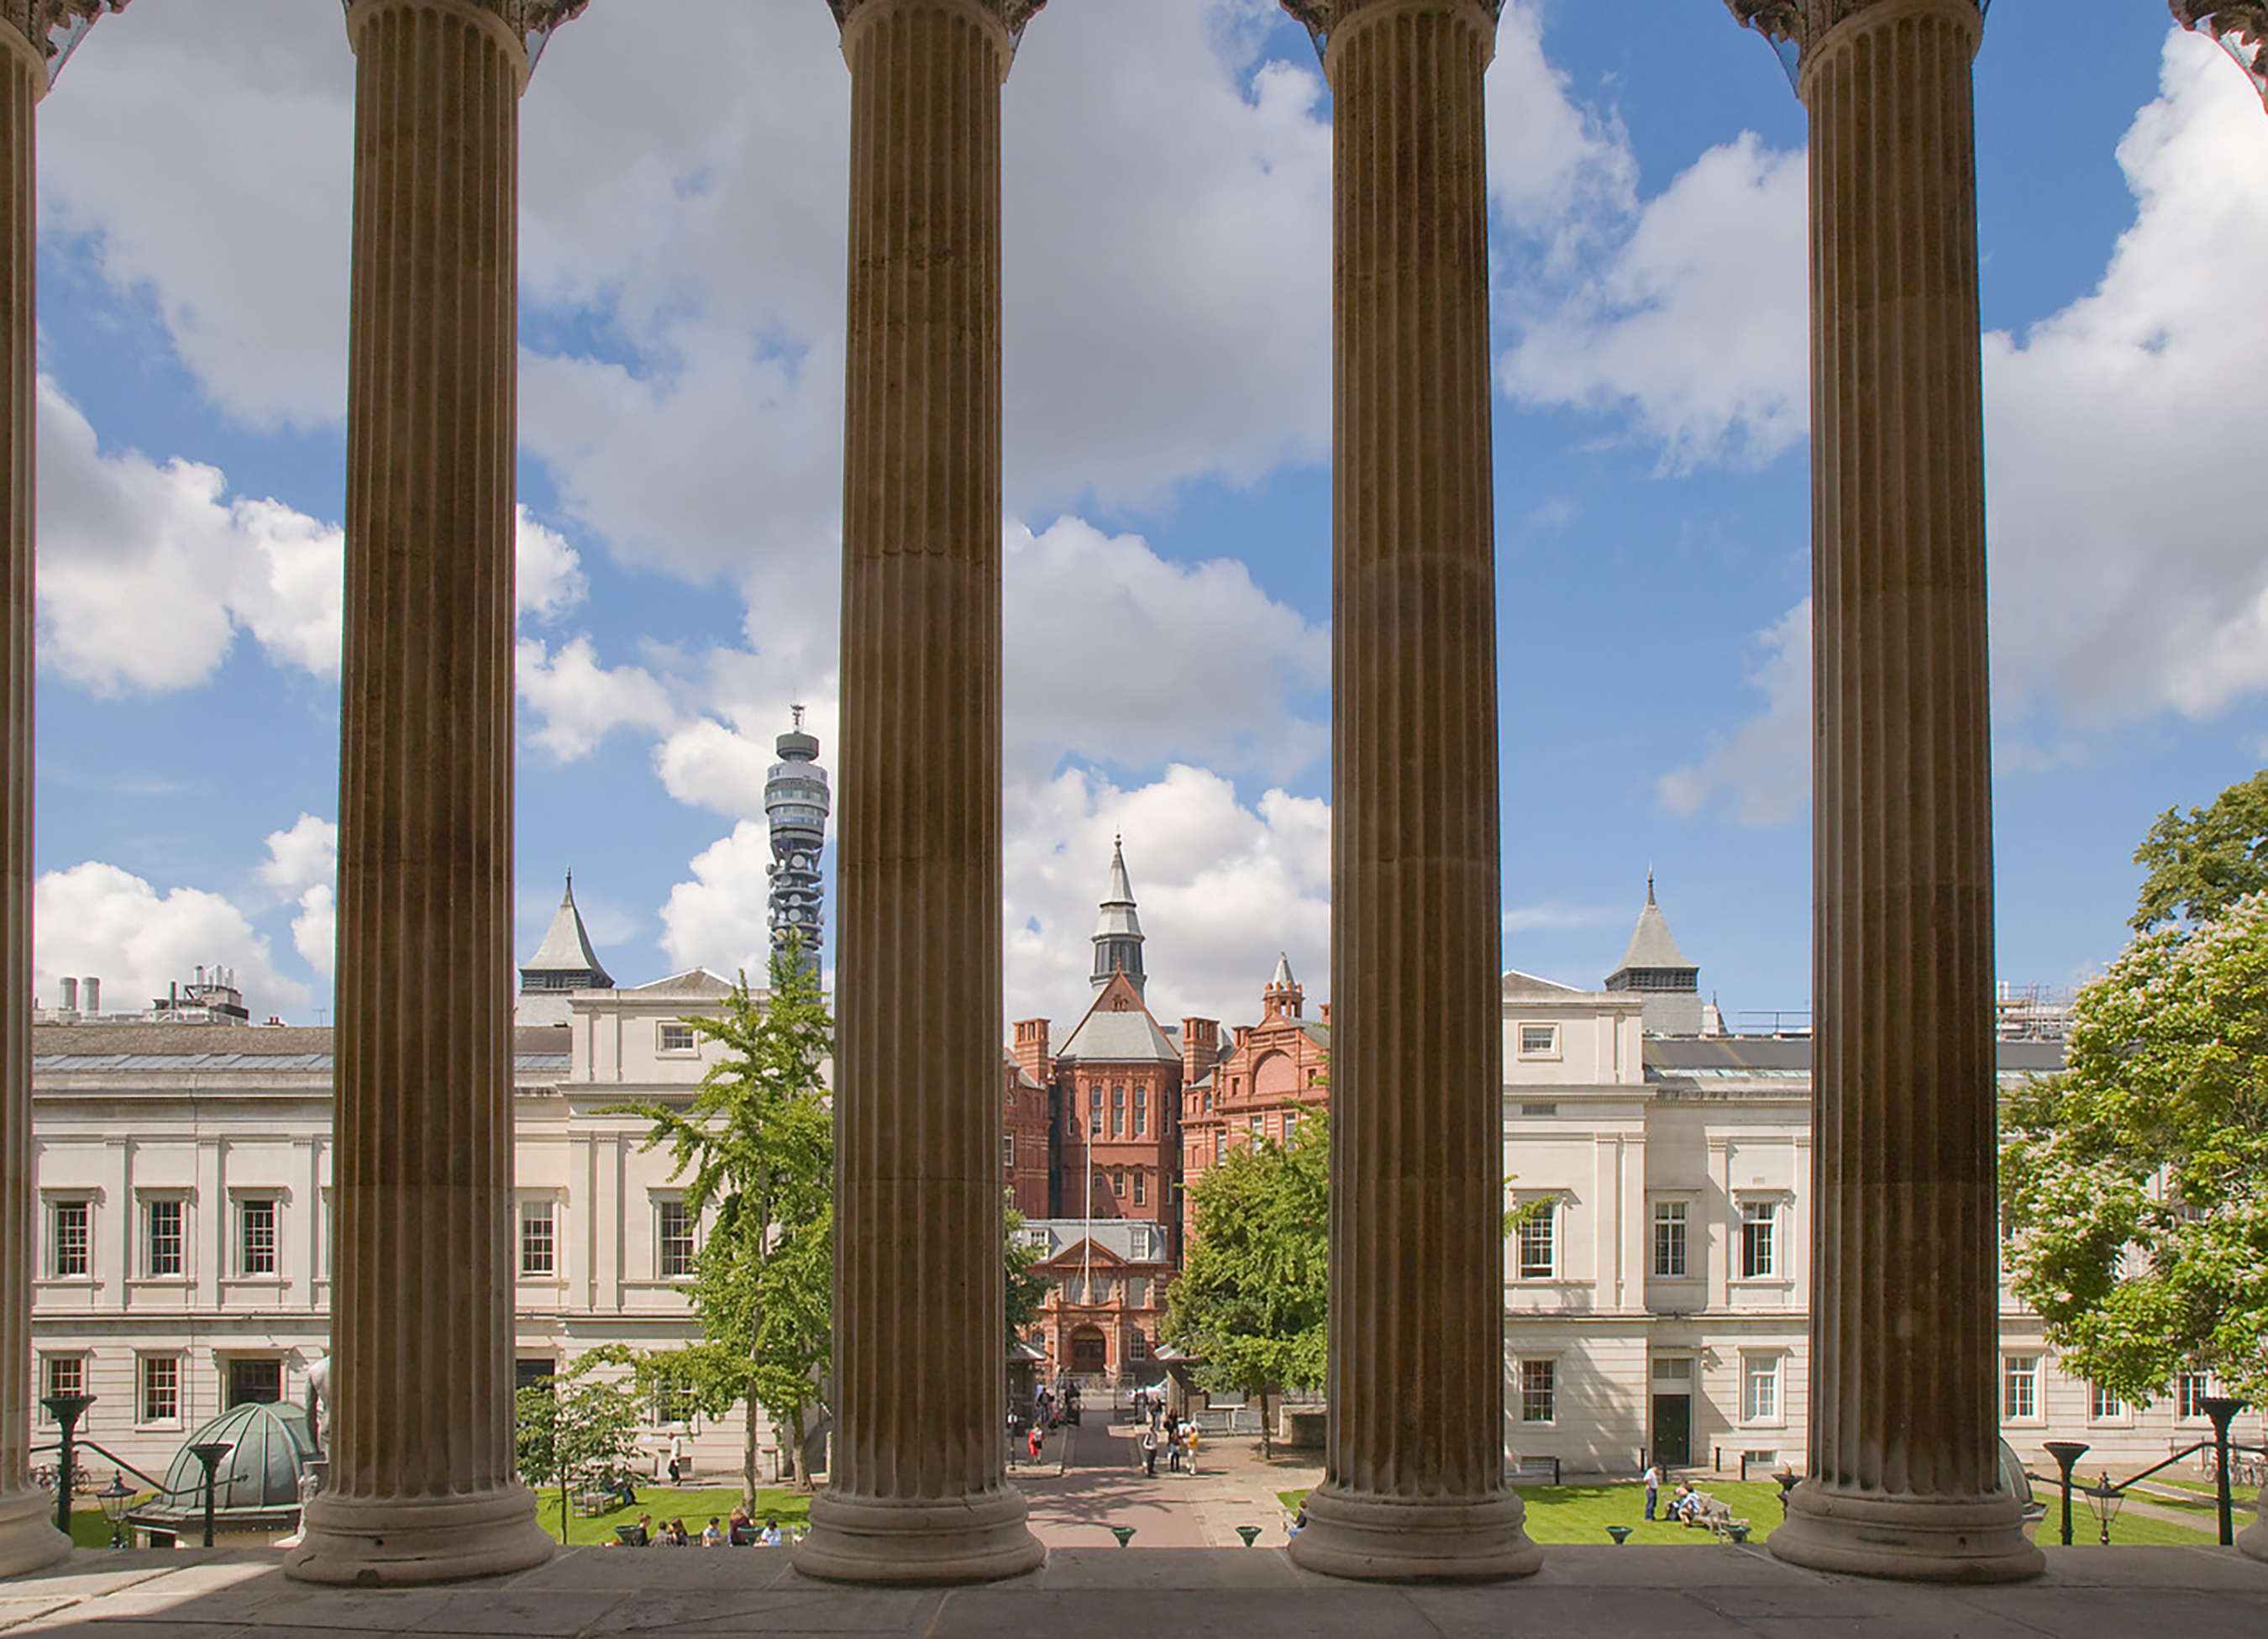 Photo of UCL main quad, looking out through pillars.